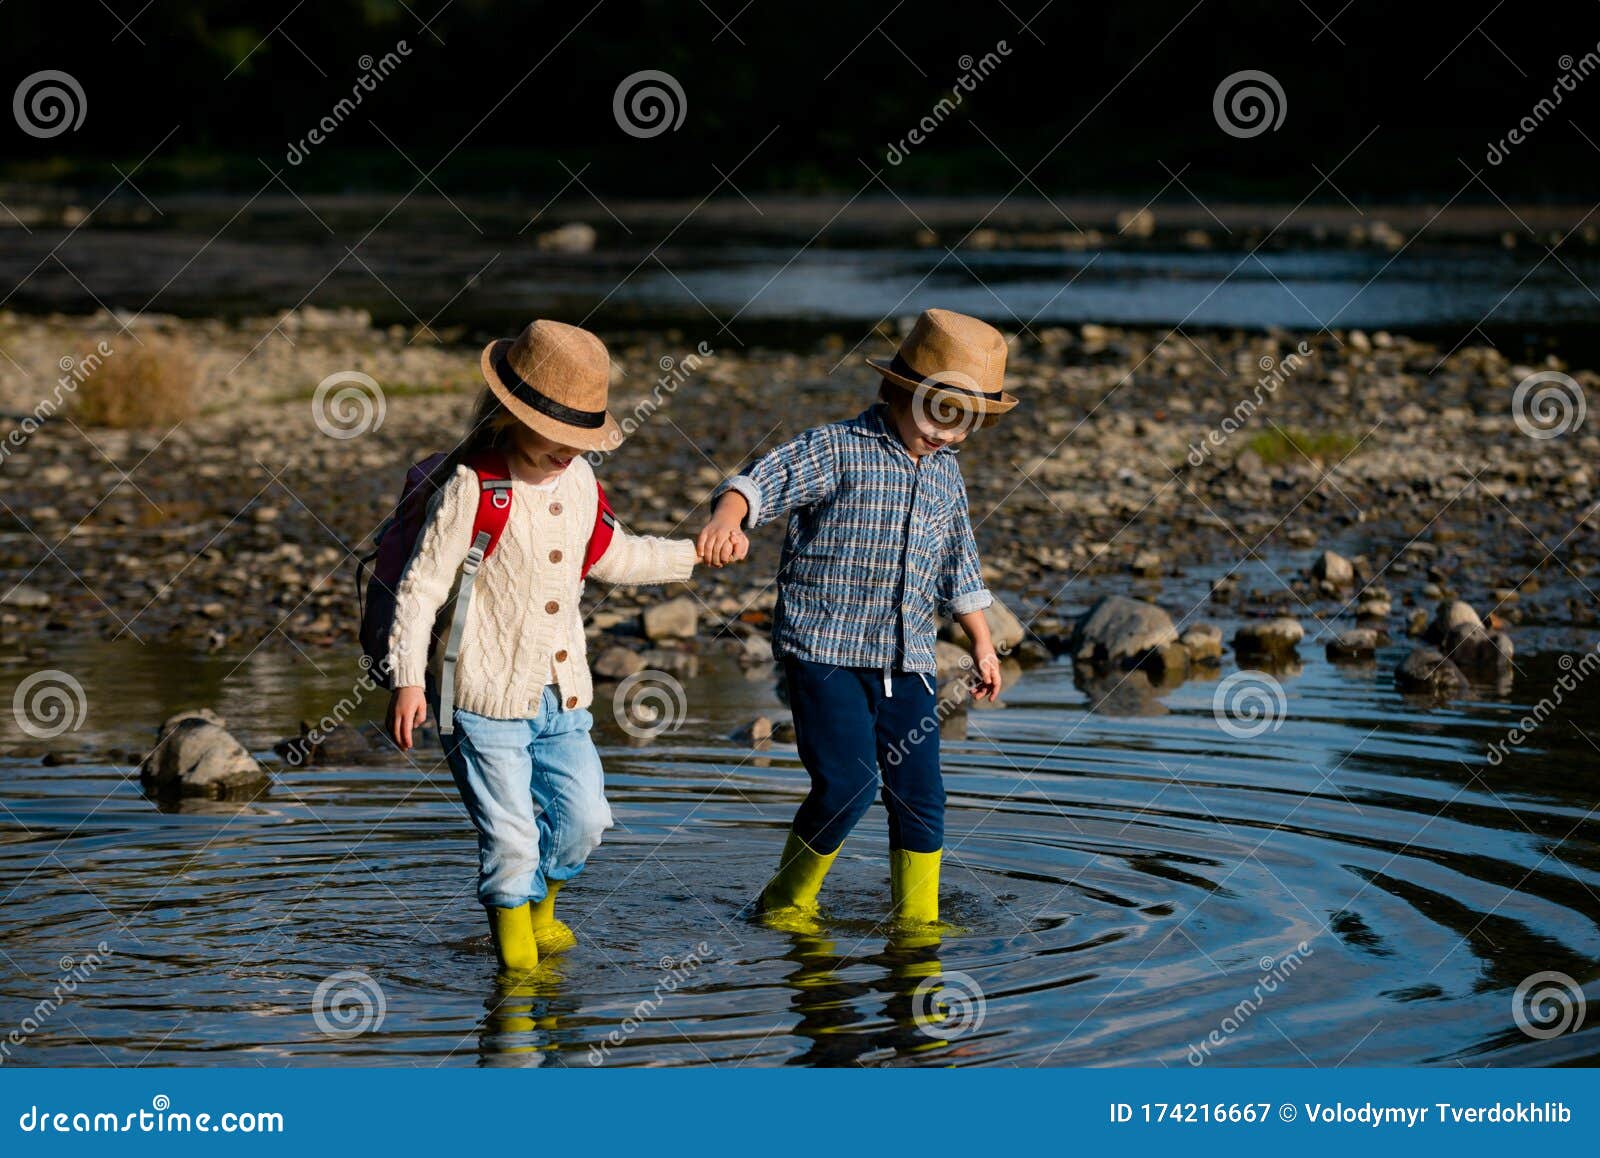 931 Little Boy Girl Best Friends Photos Free Royalty Free Stock Photos From Dreamstime